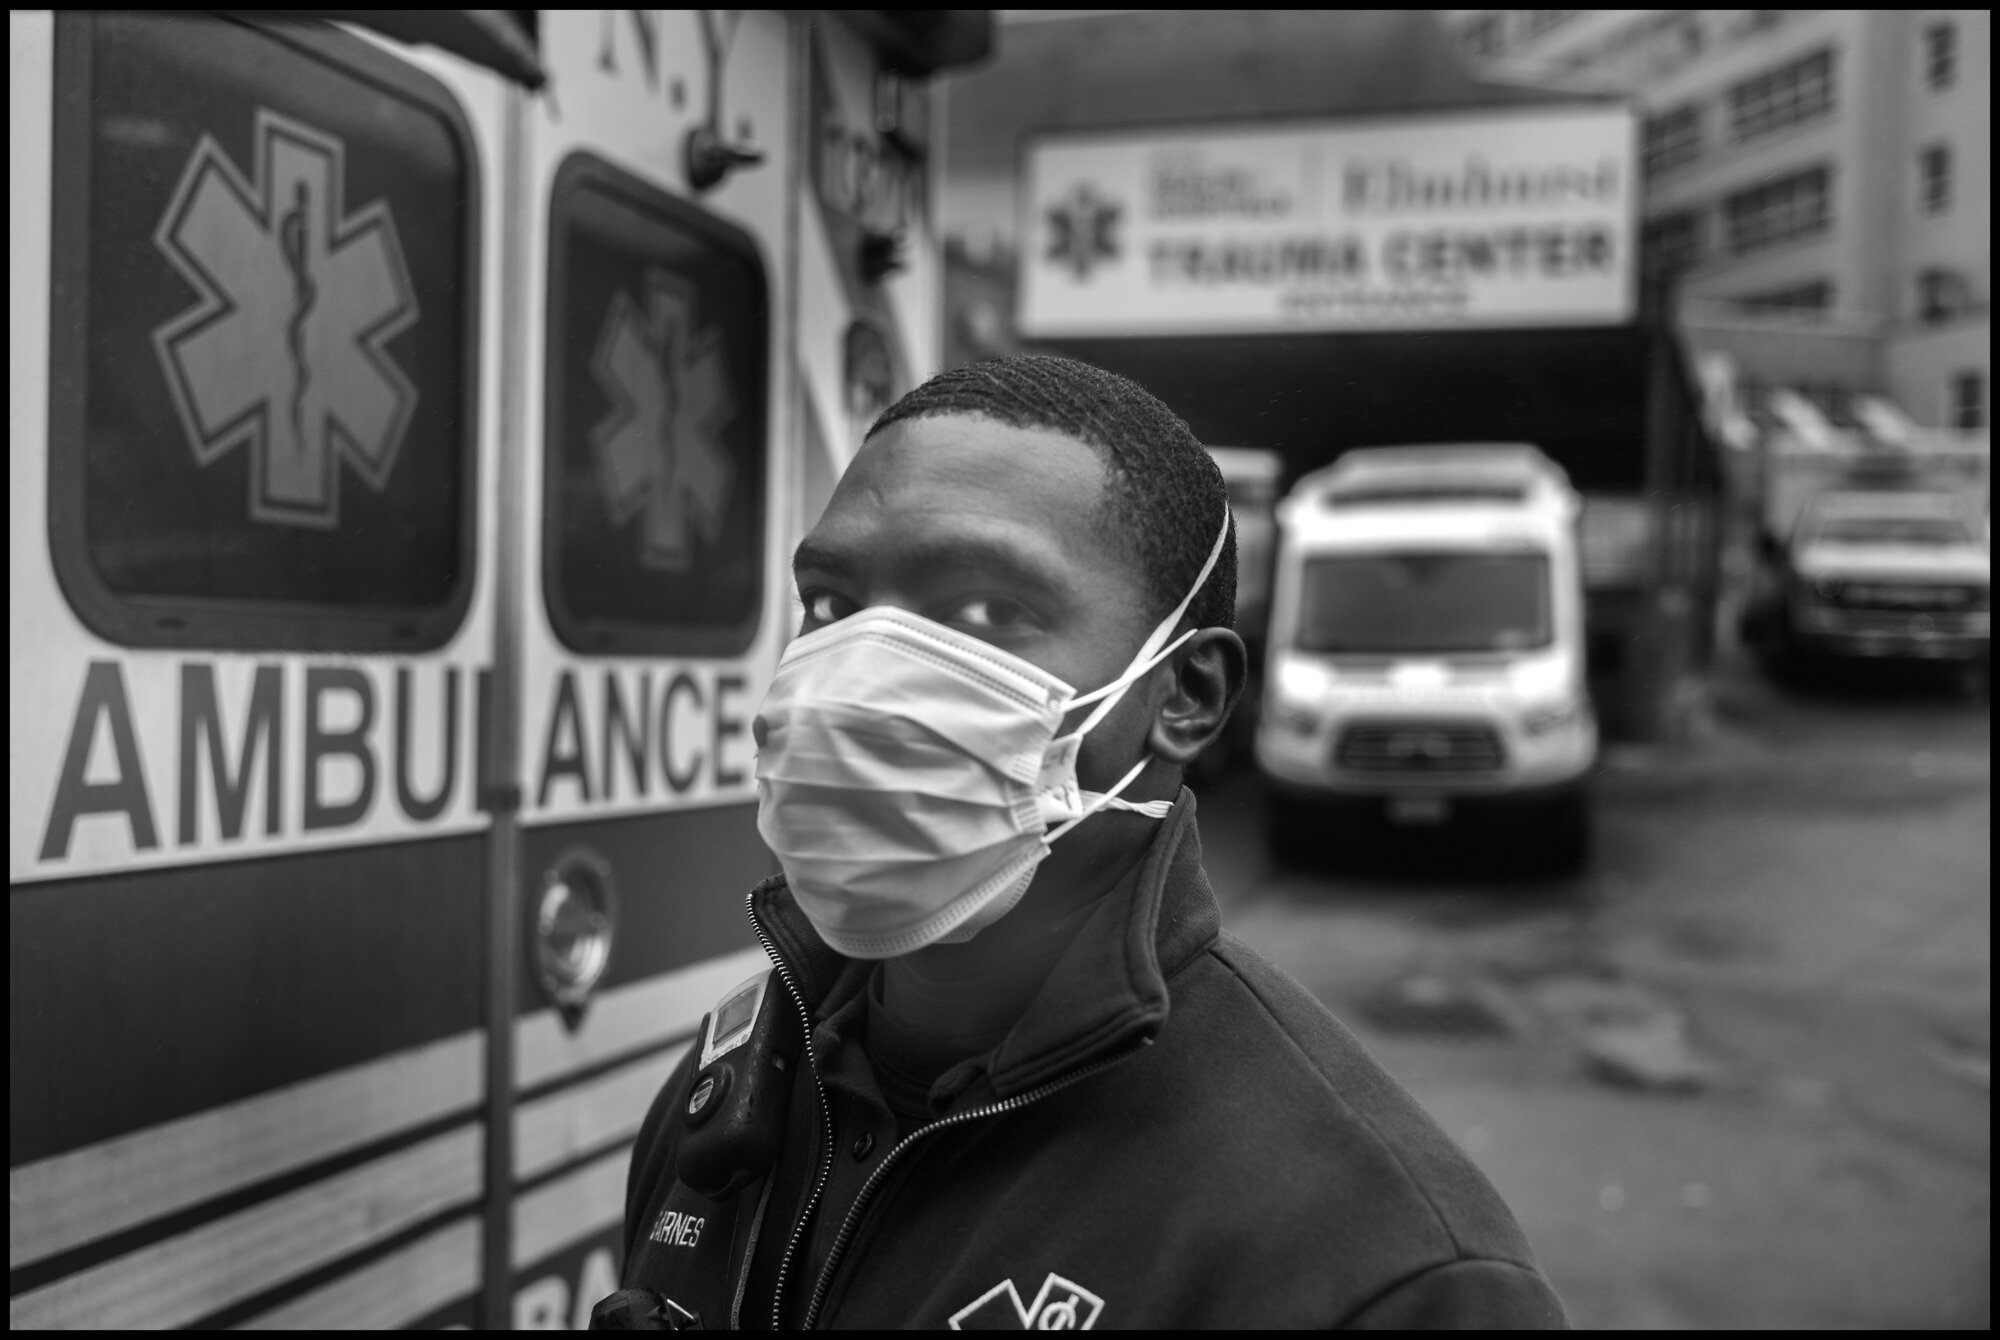  Fabrice, 28, an ambulance driver behind Elmhurst Hospital in Queens, one of the hospital in the US treating the largest number of coronavirus patients. I asked Fabrice if he was scared, and he told me, “no, but this is my first shift during this cri